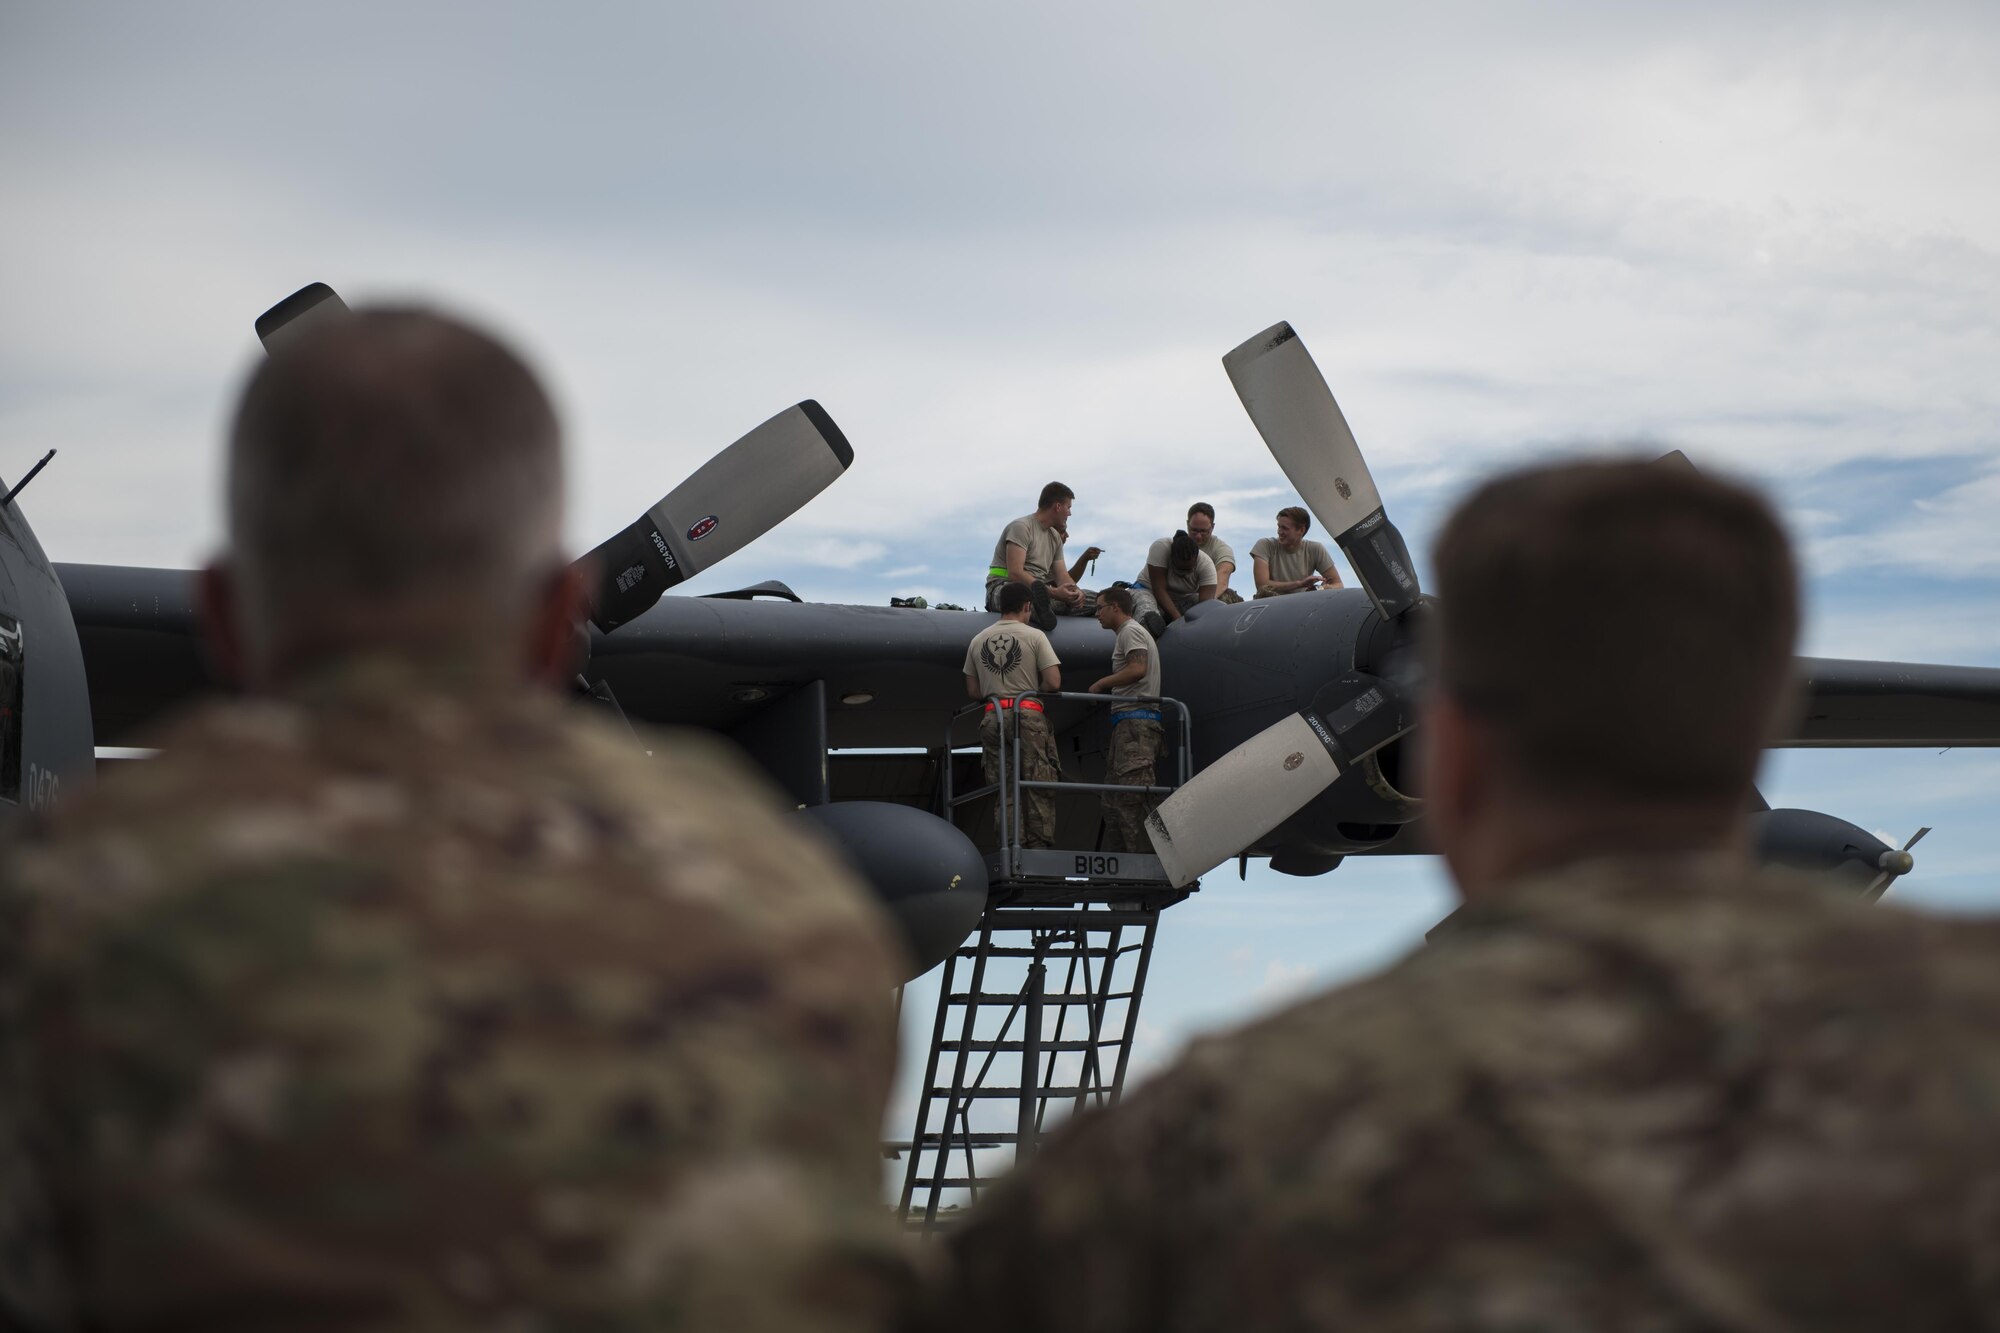 Maj. Jeff Westerman, commander of the 901st Special Operations Maintenance Squadron, and Senior Master Sgt. Carl Snider, superintendent of the 901st SOAMXS, observe their personnel as they repair an MC-130H Combat Talon II engine malfunction at Hurlburt Field, Fla., July 7, 2017. Commanders and superintendents frequently visit their Airmen on the flight line to enhance readiness and boost morale as they get after the mission in the heat, cold or rain. (U.S. Air Force photo by Tech. Sgt. Jeffrey Curtin)